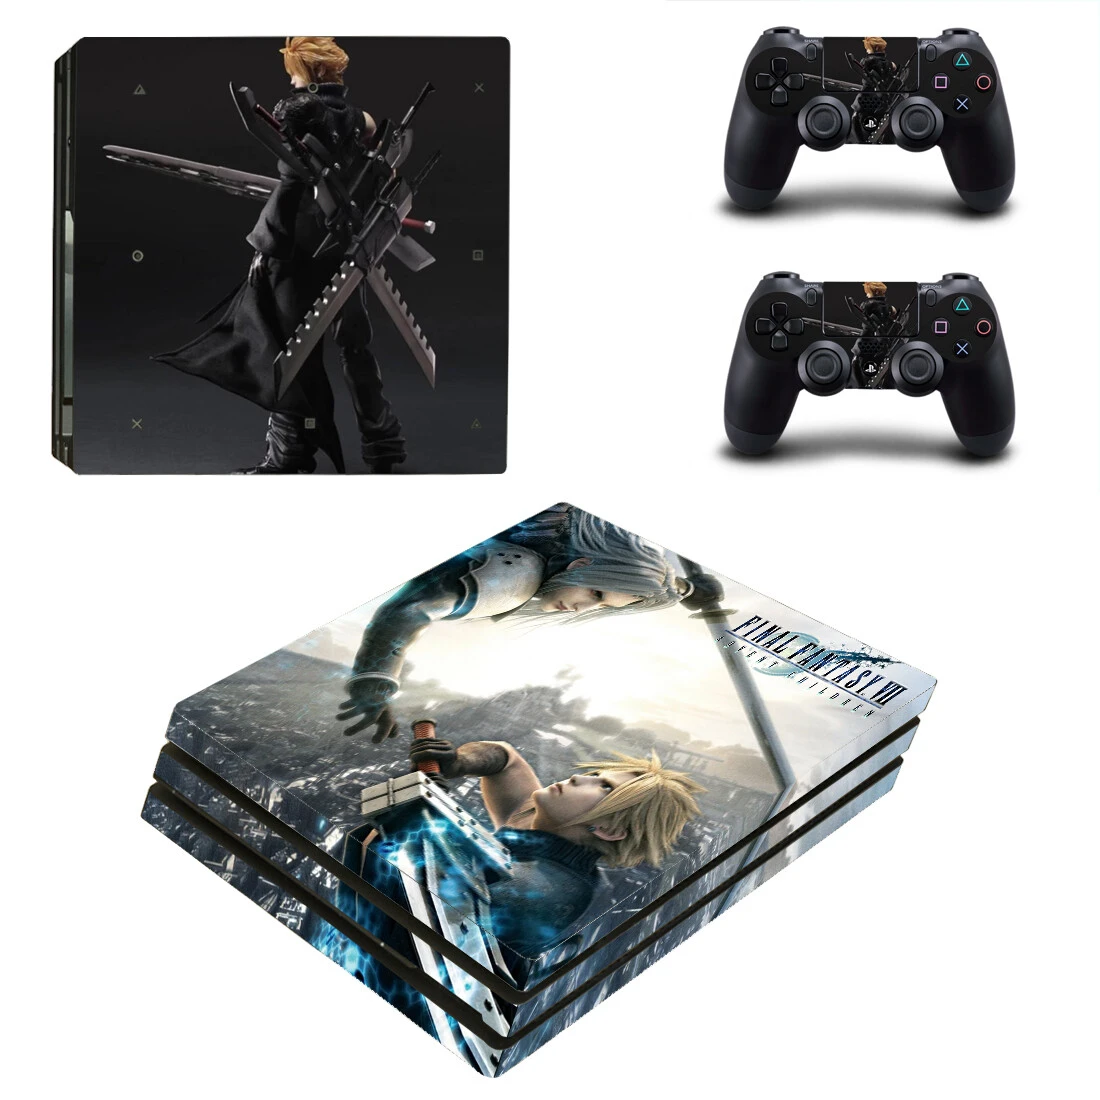 New Game Final Fantasy Pro Skin Sticker Decals Cover Playstation 4 Ps4 Pro Console & Controller Skins Vinyl - Stickers - AliExpress